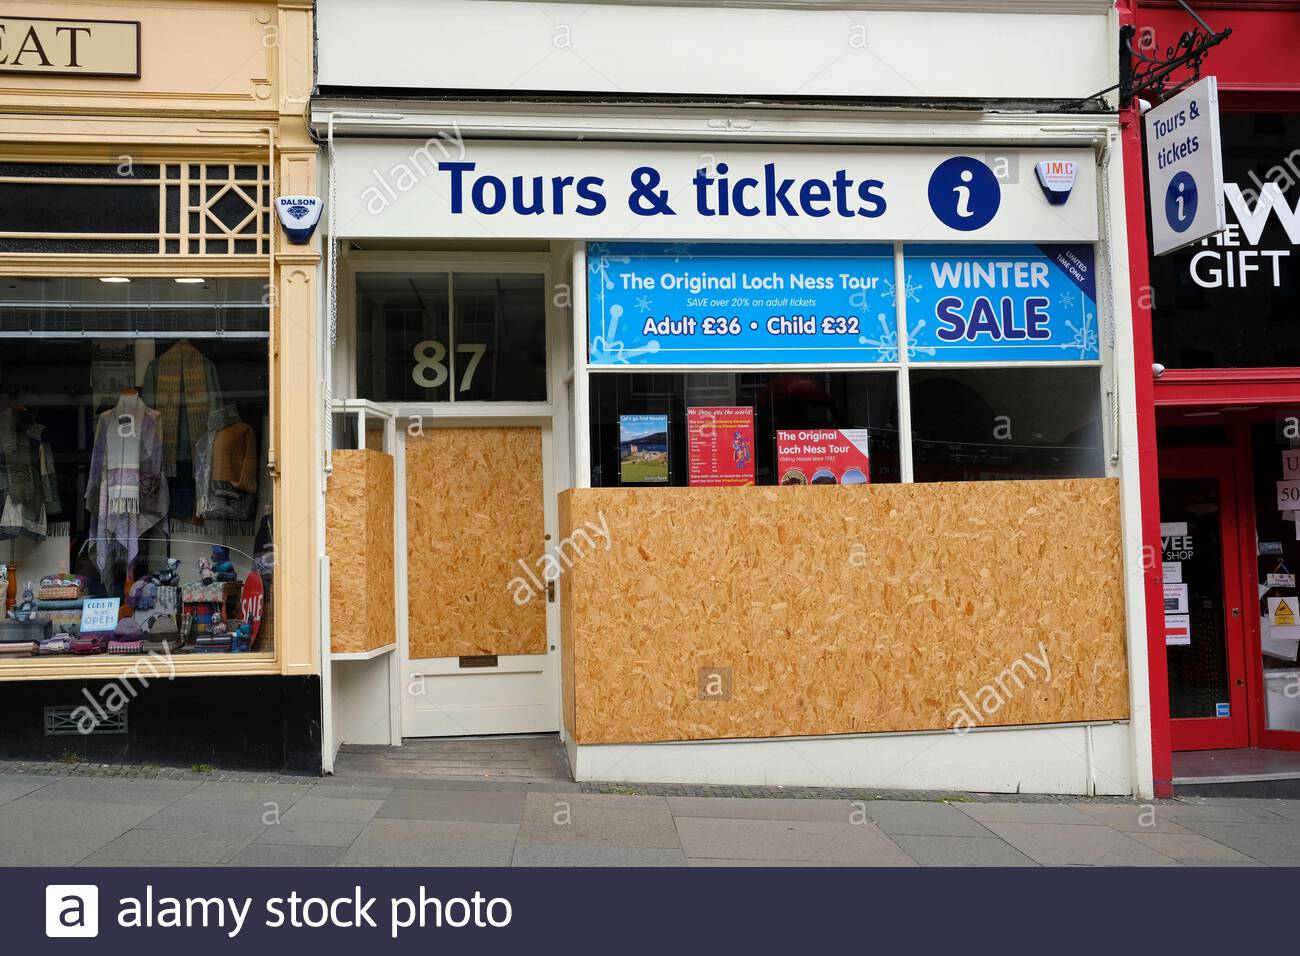 Tours and Tickets  boarded up due to the Coronavirus Covid-19 epidemic, Royal Mile, Edinburgh Scotland Stock Photo